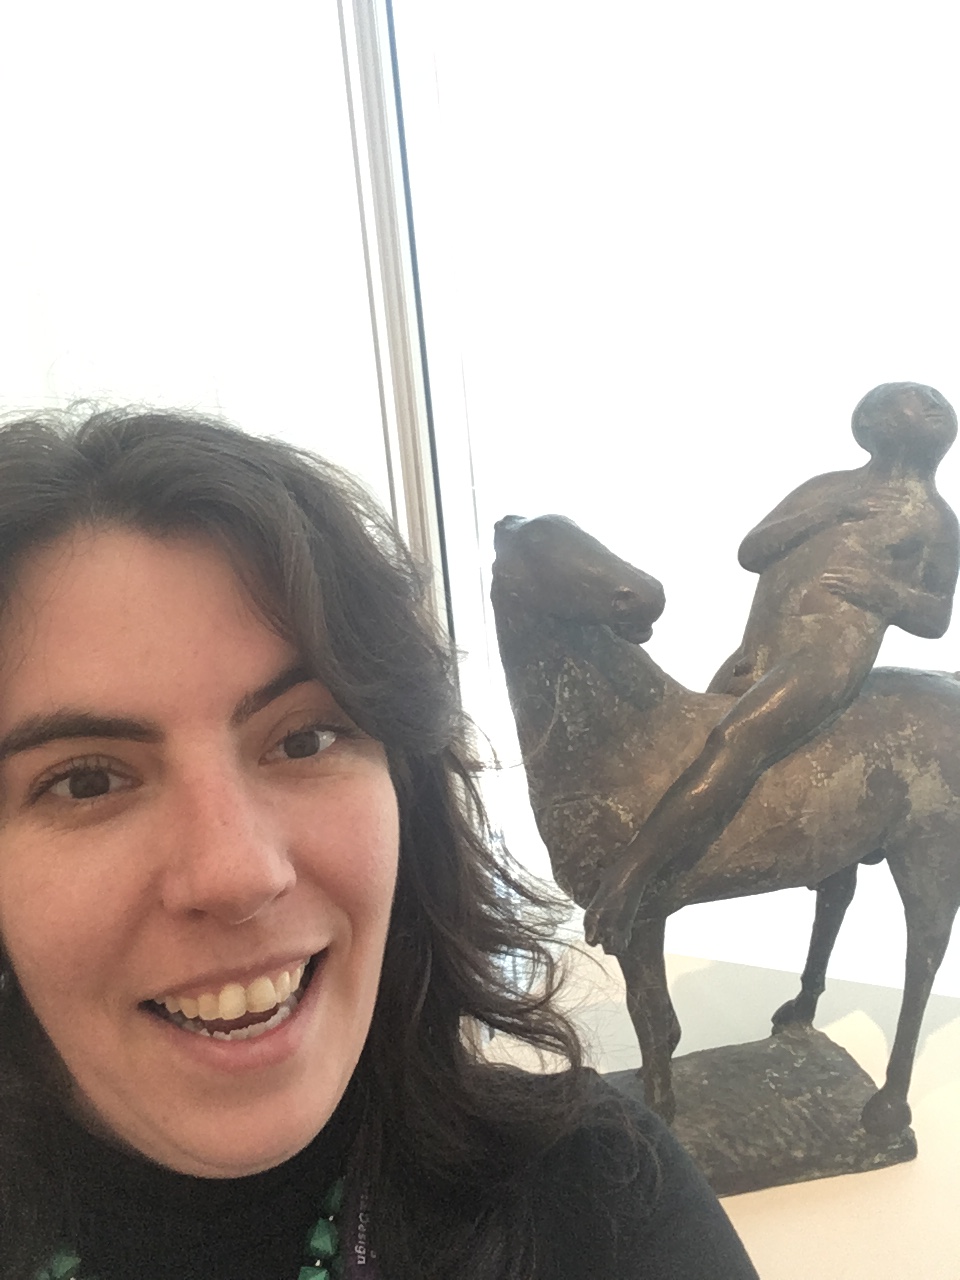 Selfie of woman smilling and bottom left with sculpture by Marino Marini (bronze "horse and rider") at center right